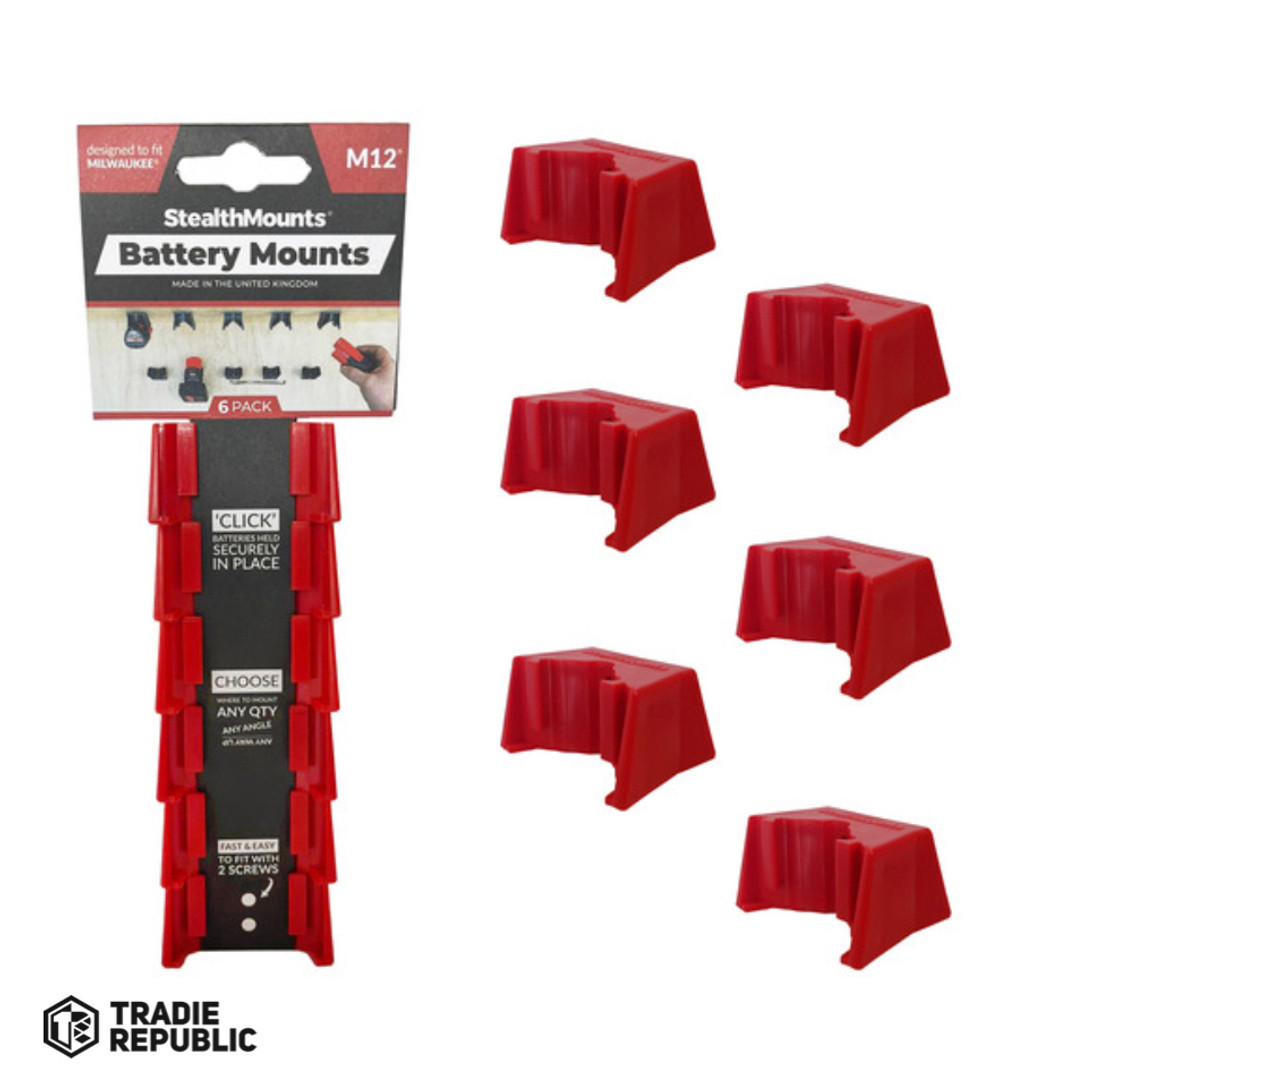 BMMW12RED6 StealthMounts Red Battery Mounts For Milwaukee M12 - 6pack